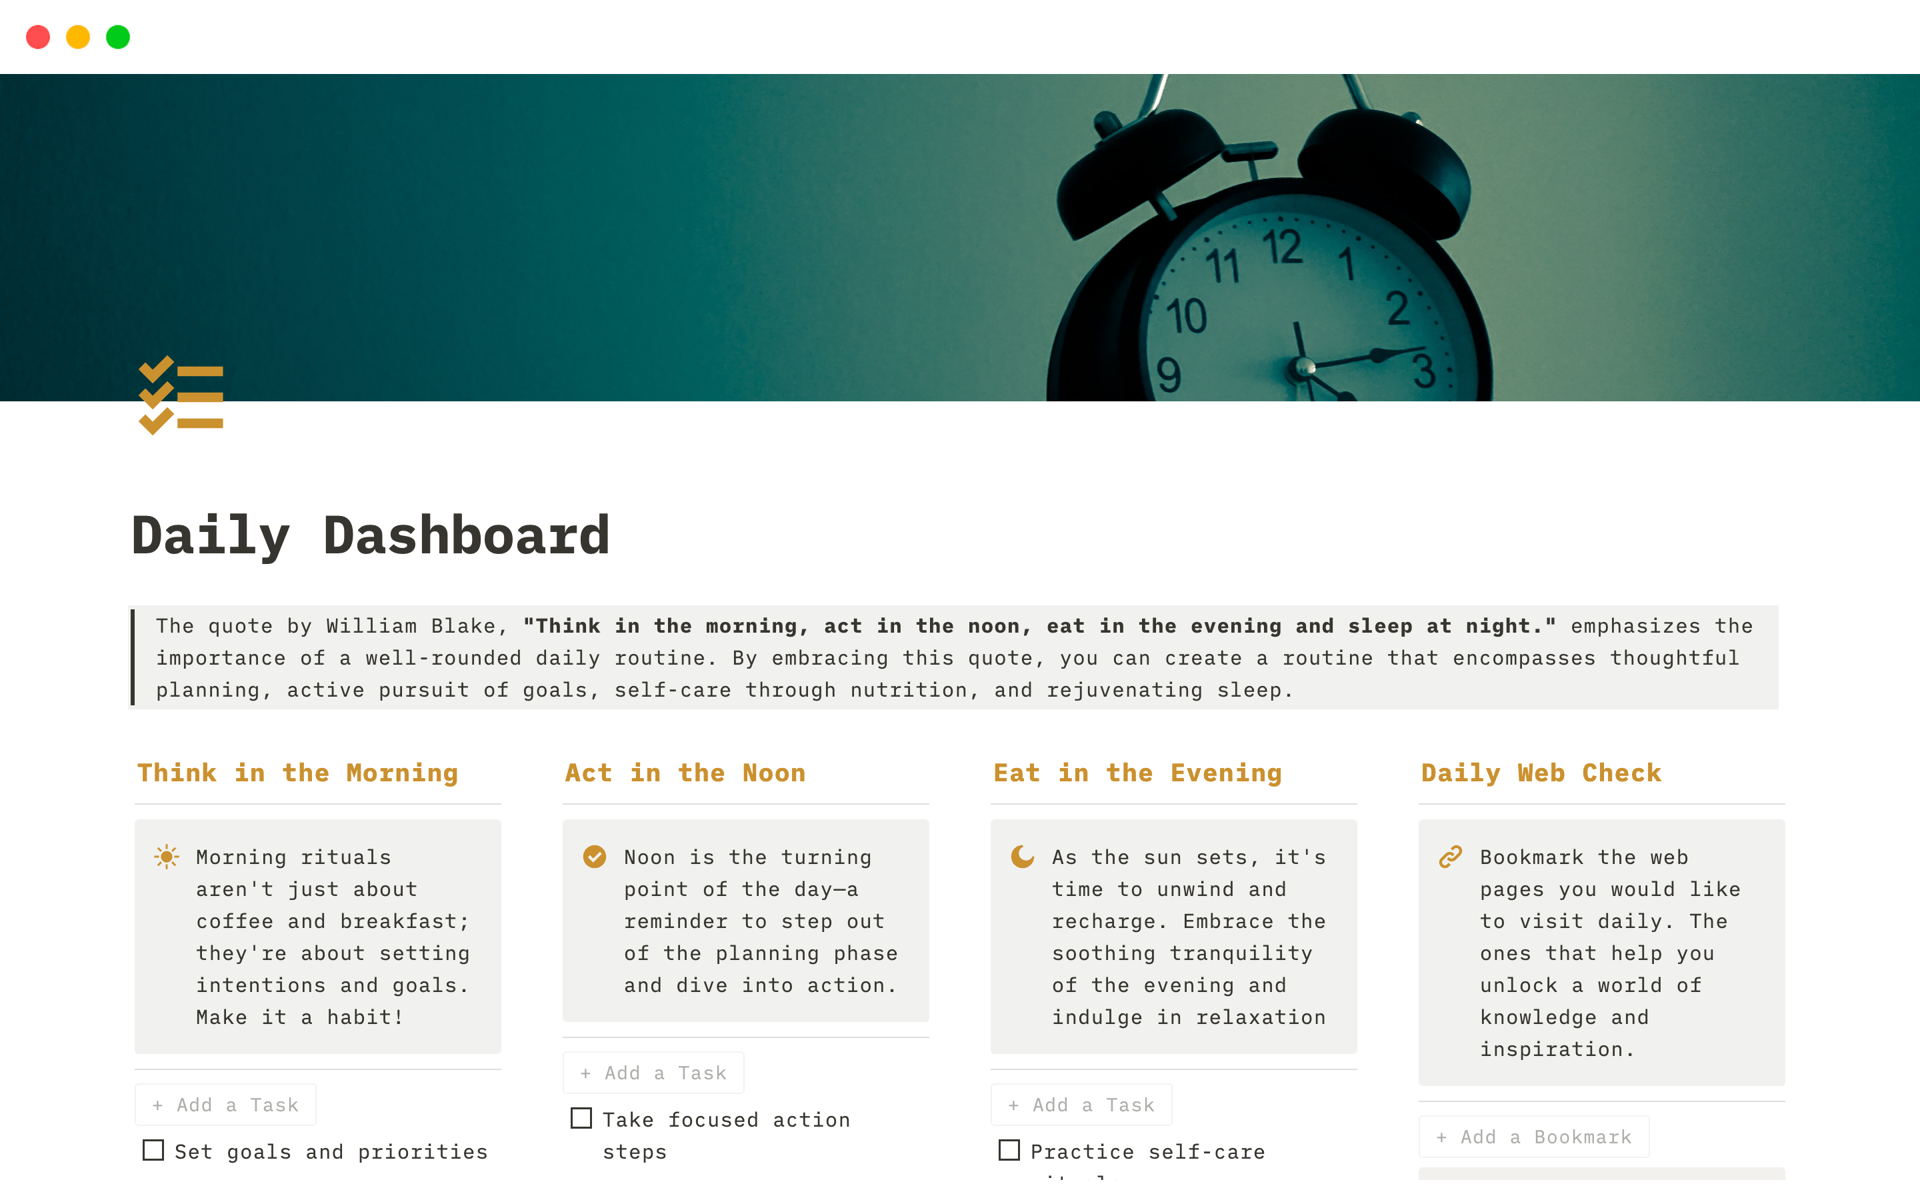 Optimize your daily routine with this Daily Dashboard inspired by the 'Think-Act-Eat' wisdom of William Blake. 